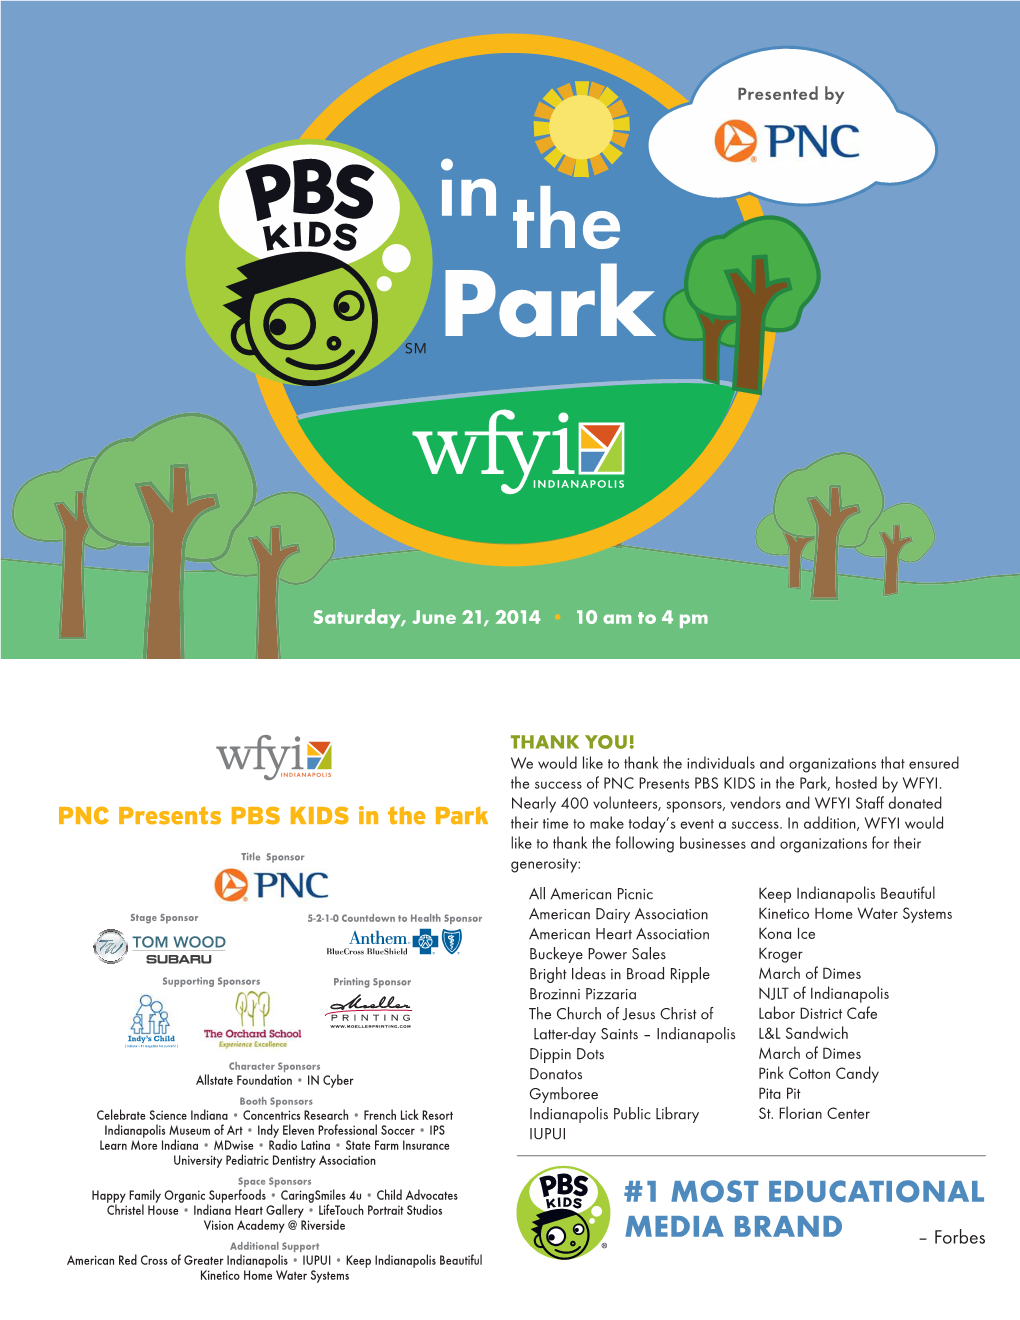 Pnc-Presents-Pbs-Kids-In-The-Park